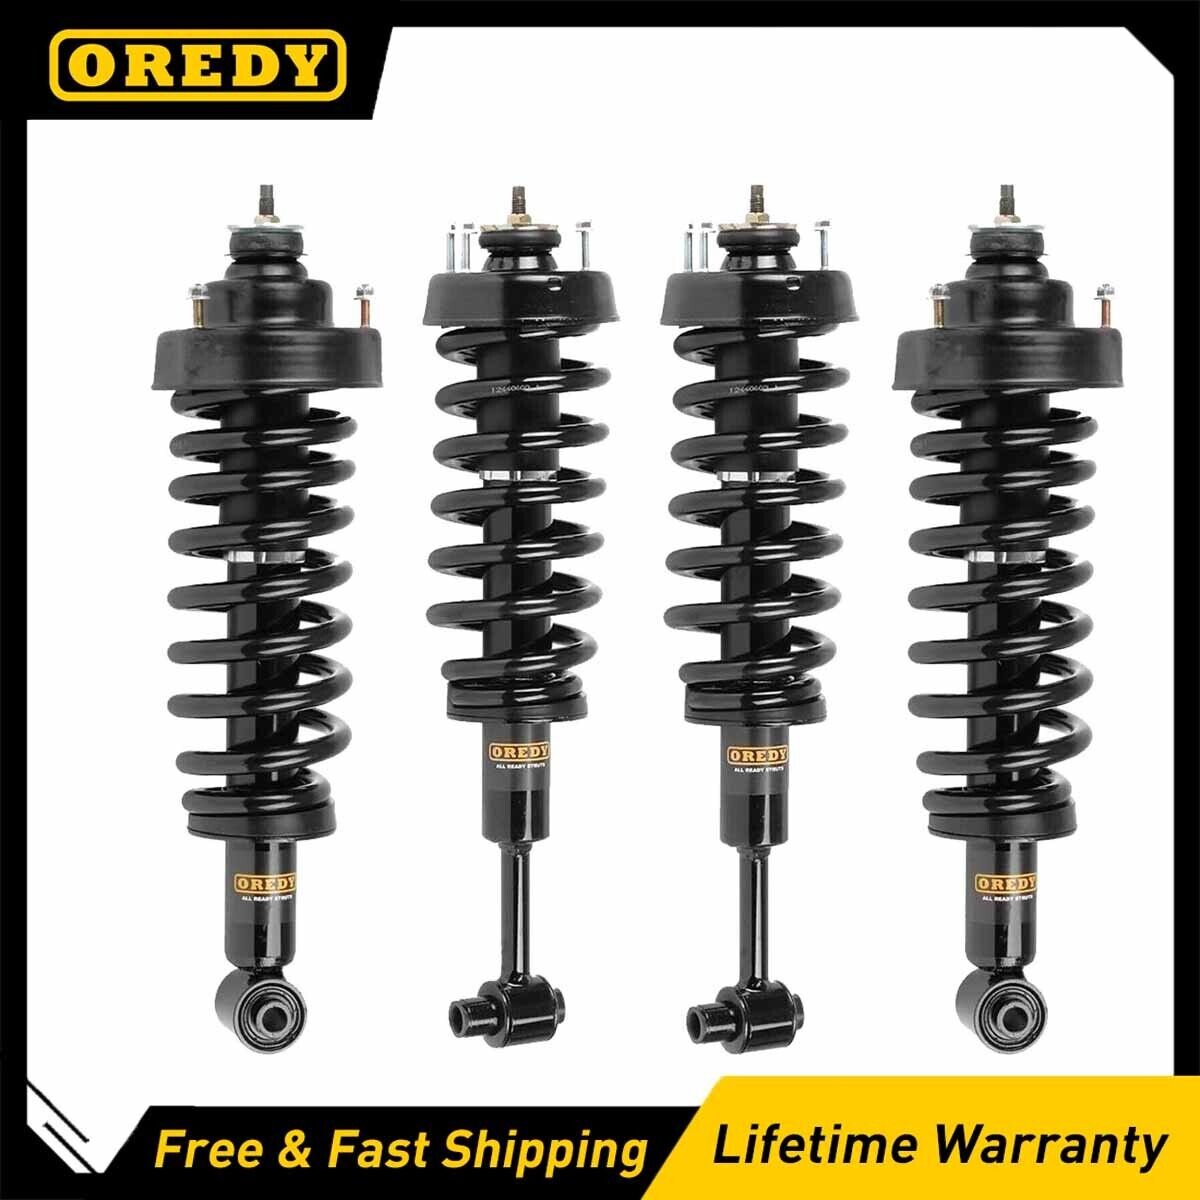 2x Front + 2x Rear Struts for 2004 2005 Ford Explorer Mercury Mountaineer